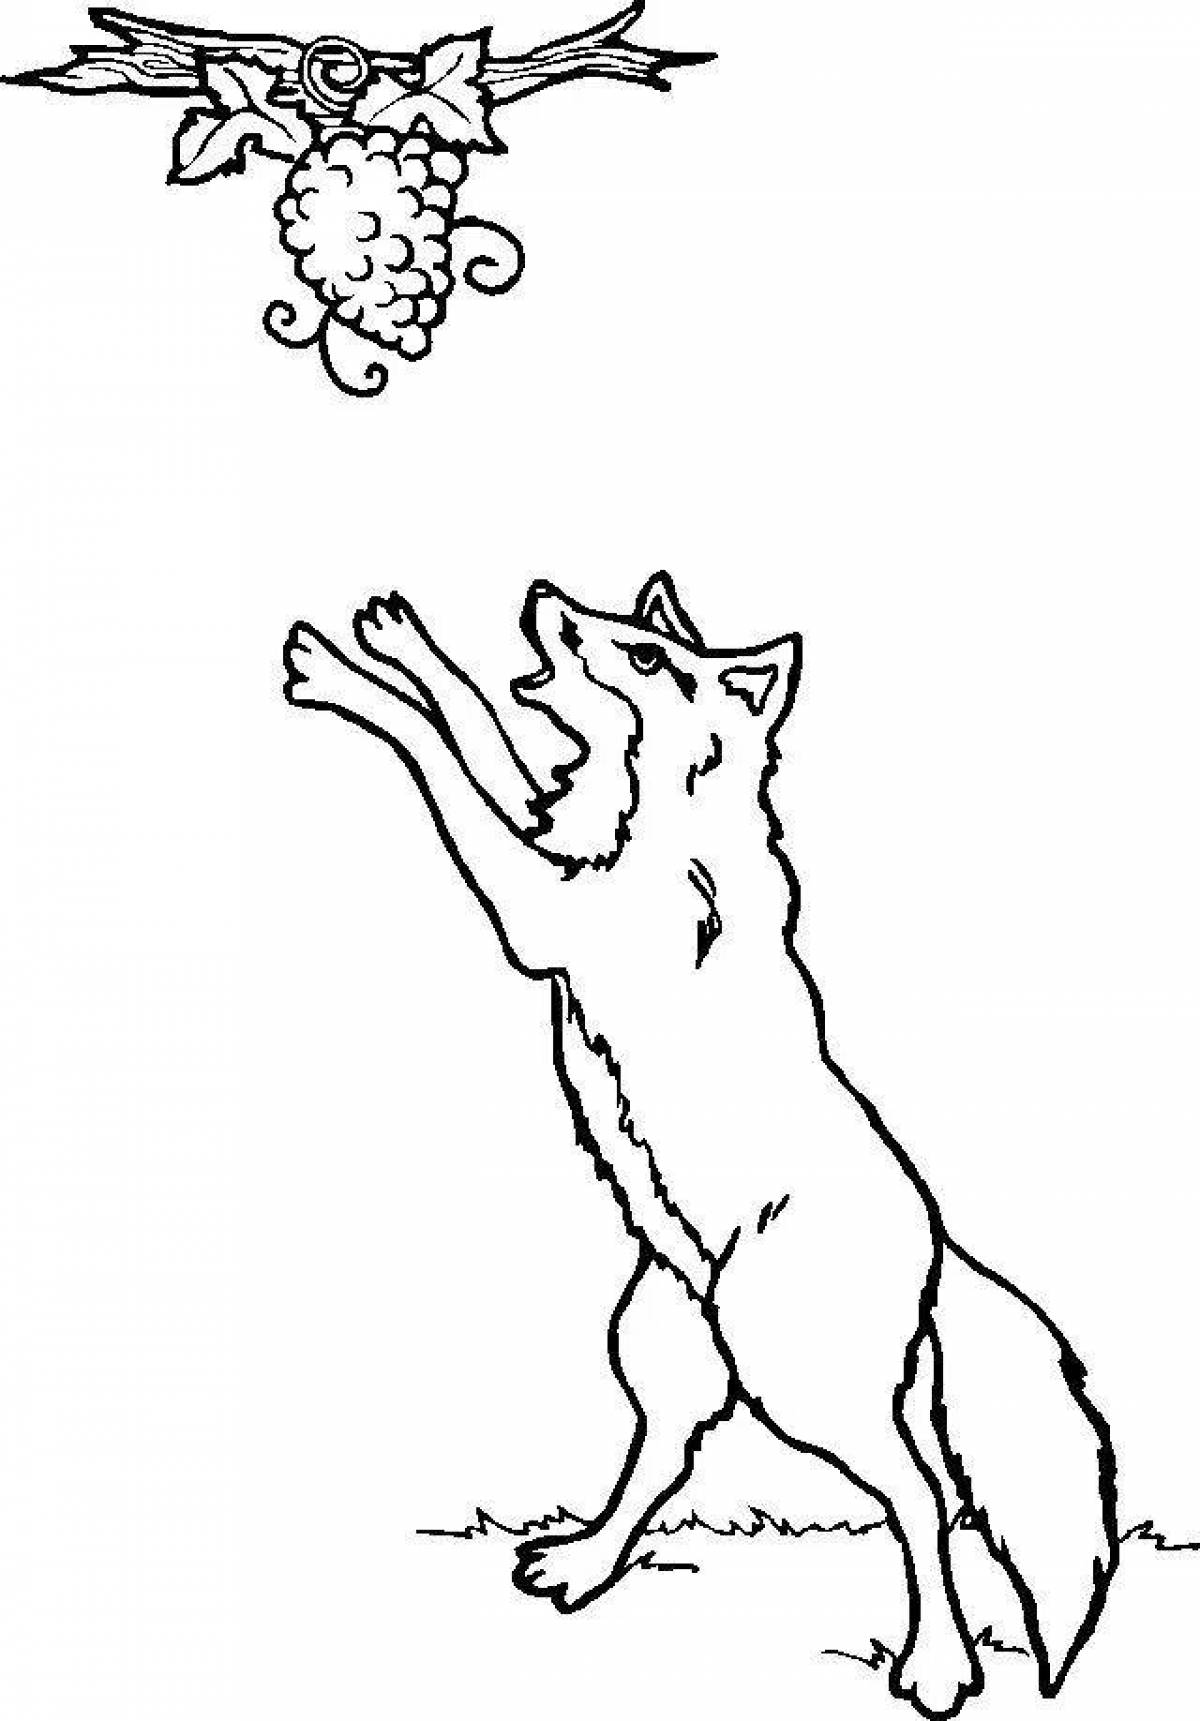 Crow and Fox coloring page